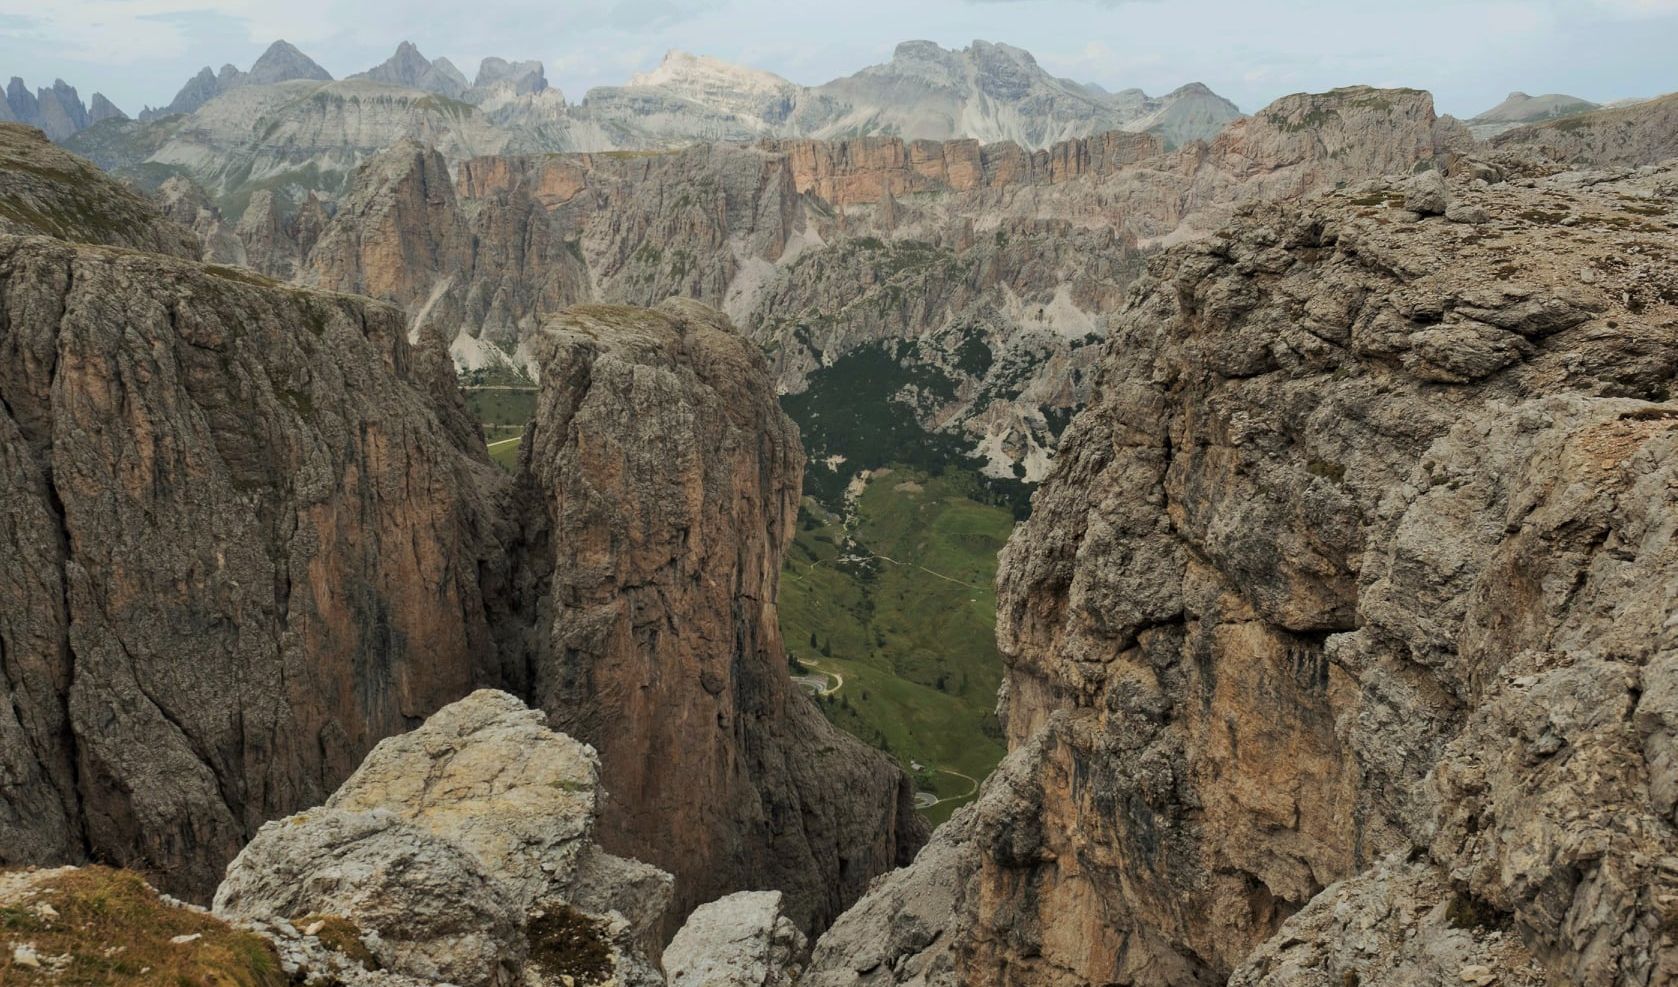 On ascent of Pic Boe in the Italian Dolomites